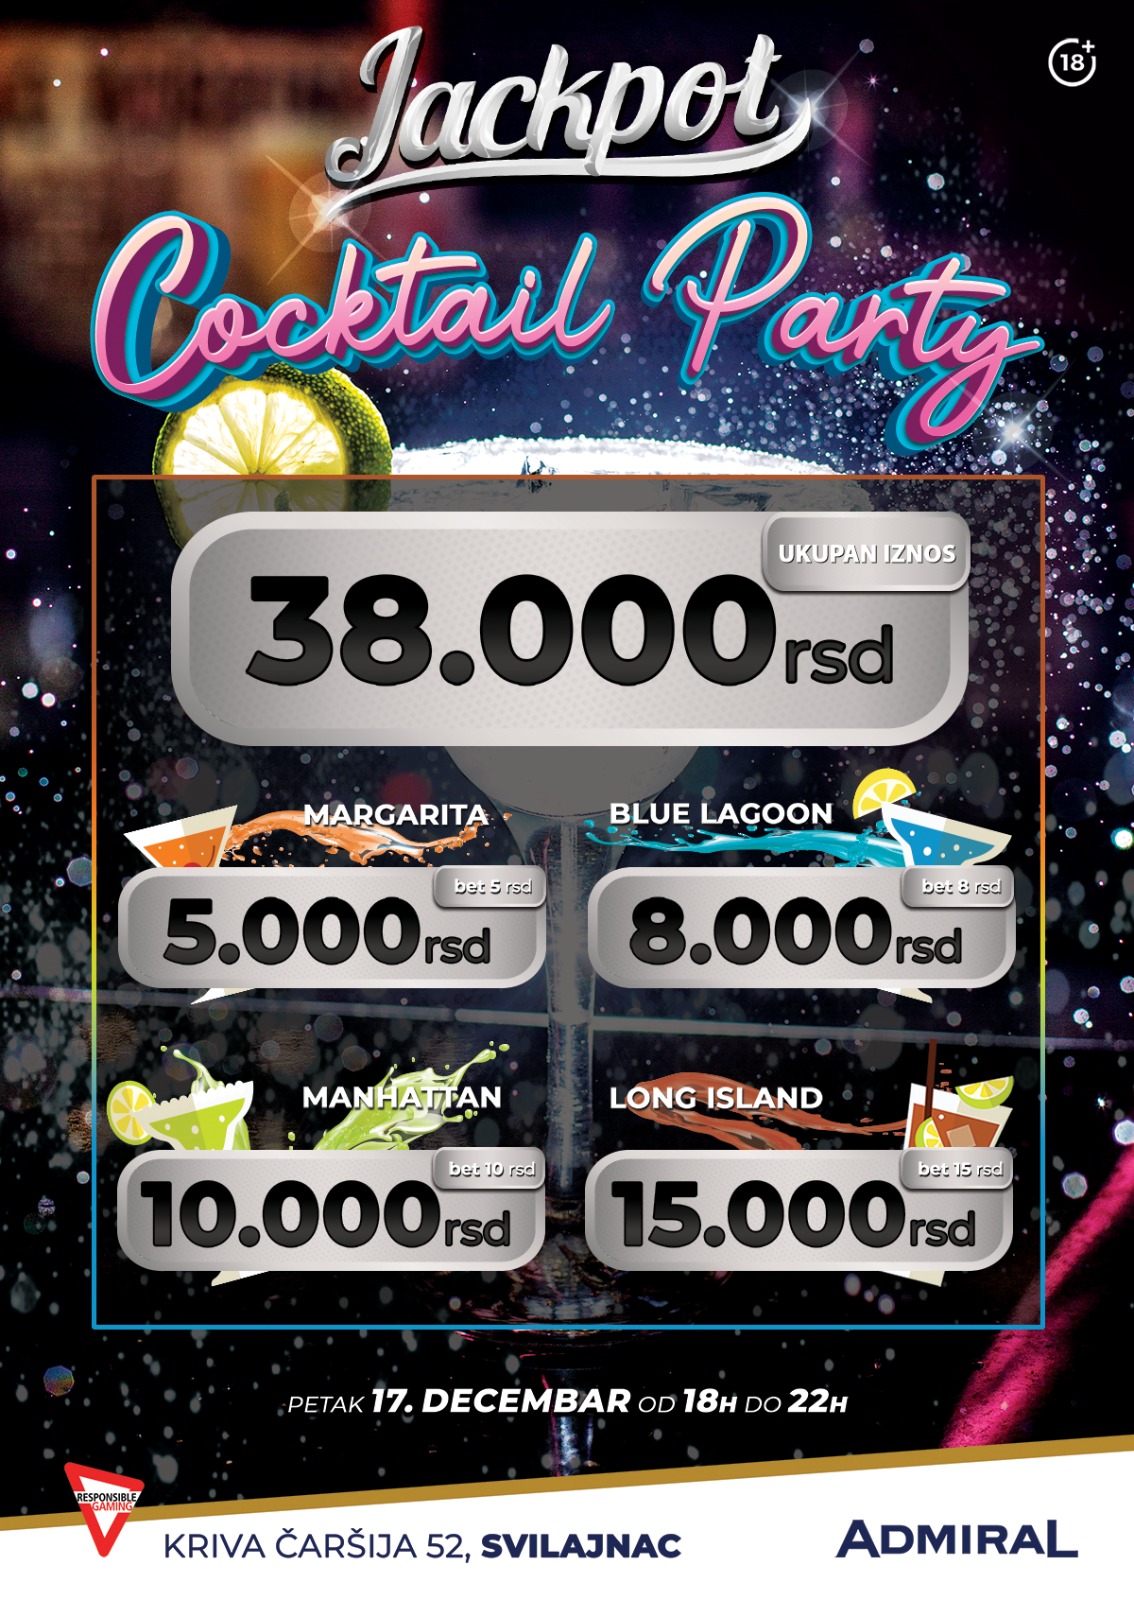 COCKTAIL PARTY JACKPOT